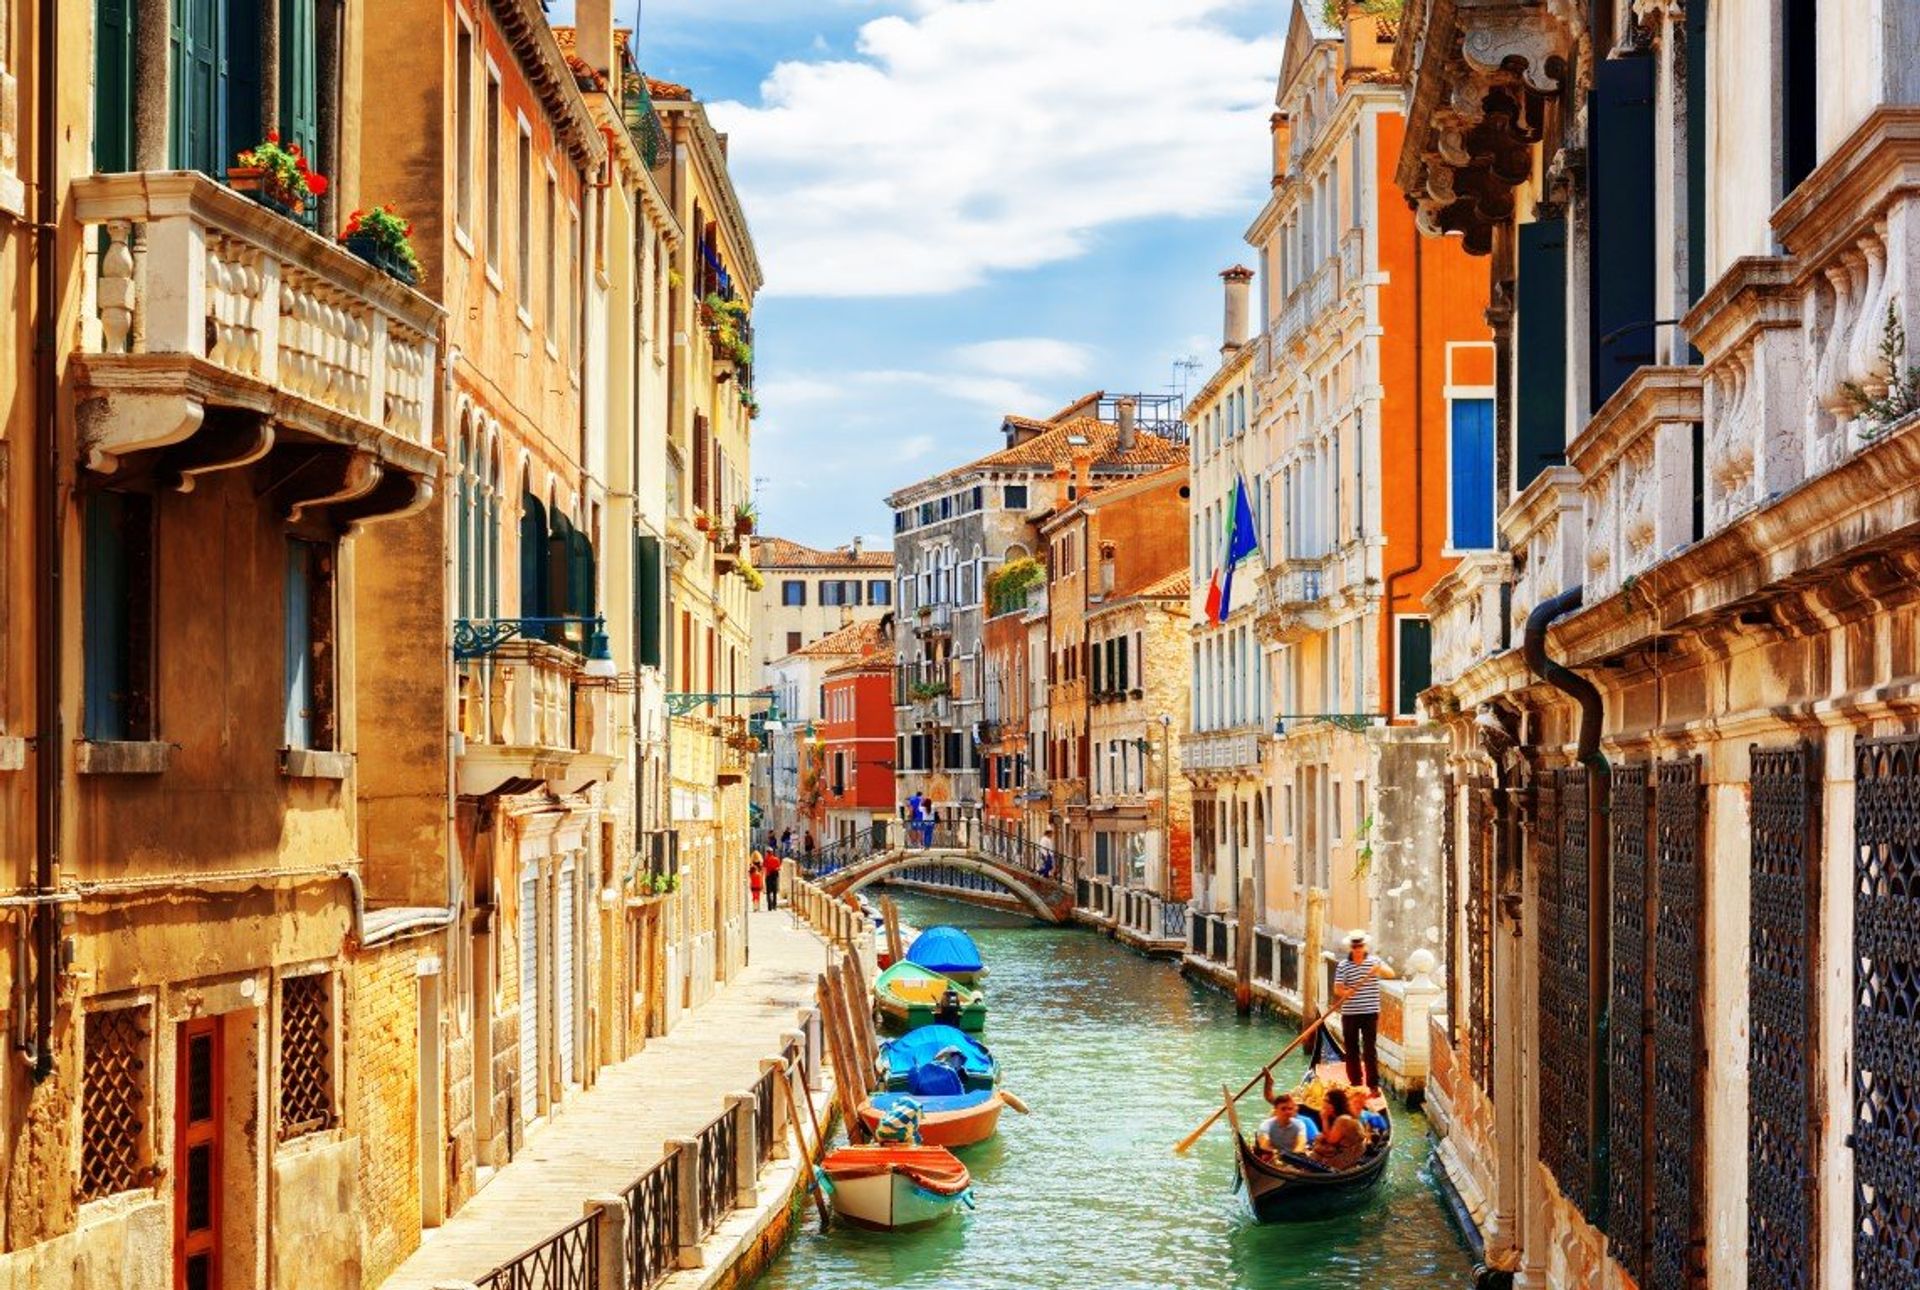 Explore the charms of Venice with a gondola ride down the Grand Canal Thoroughfare 